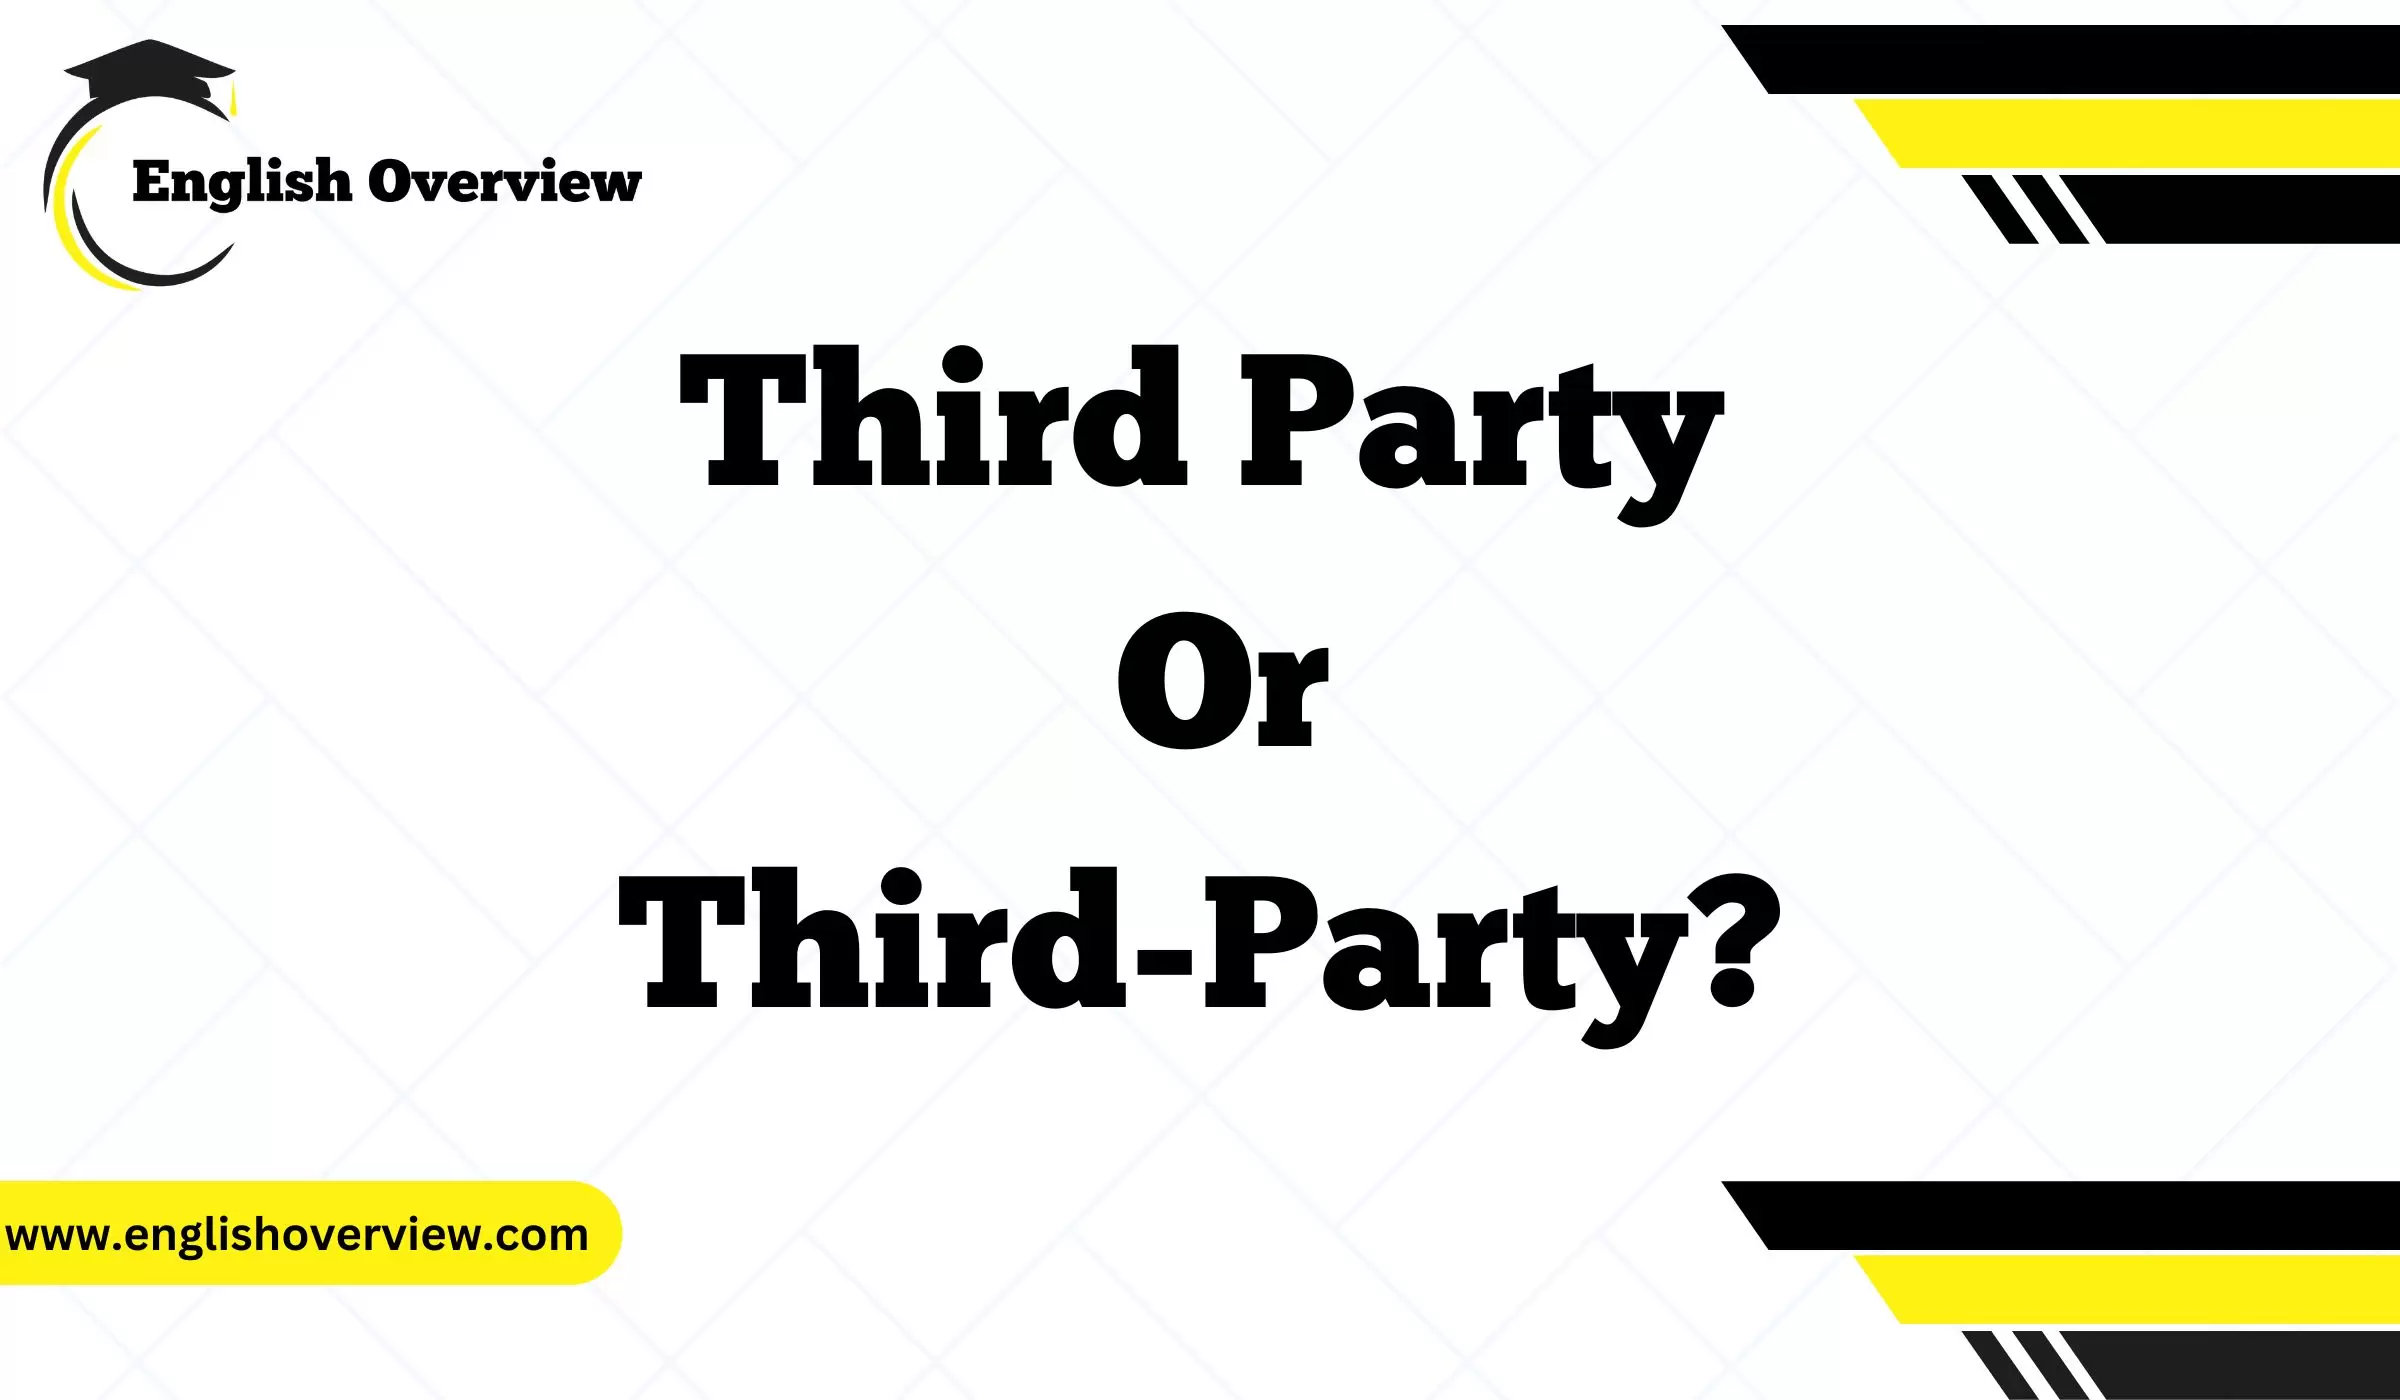 Third Party or Third-Party